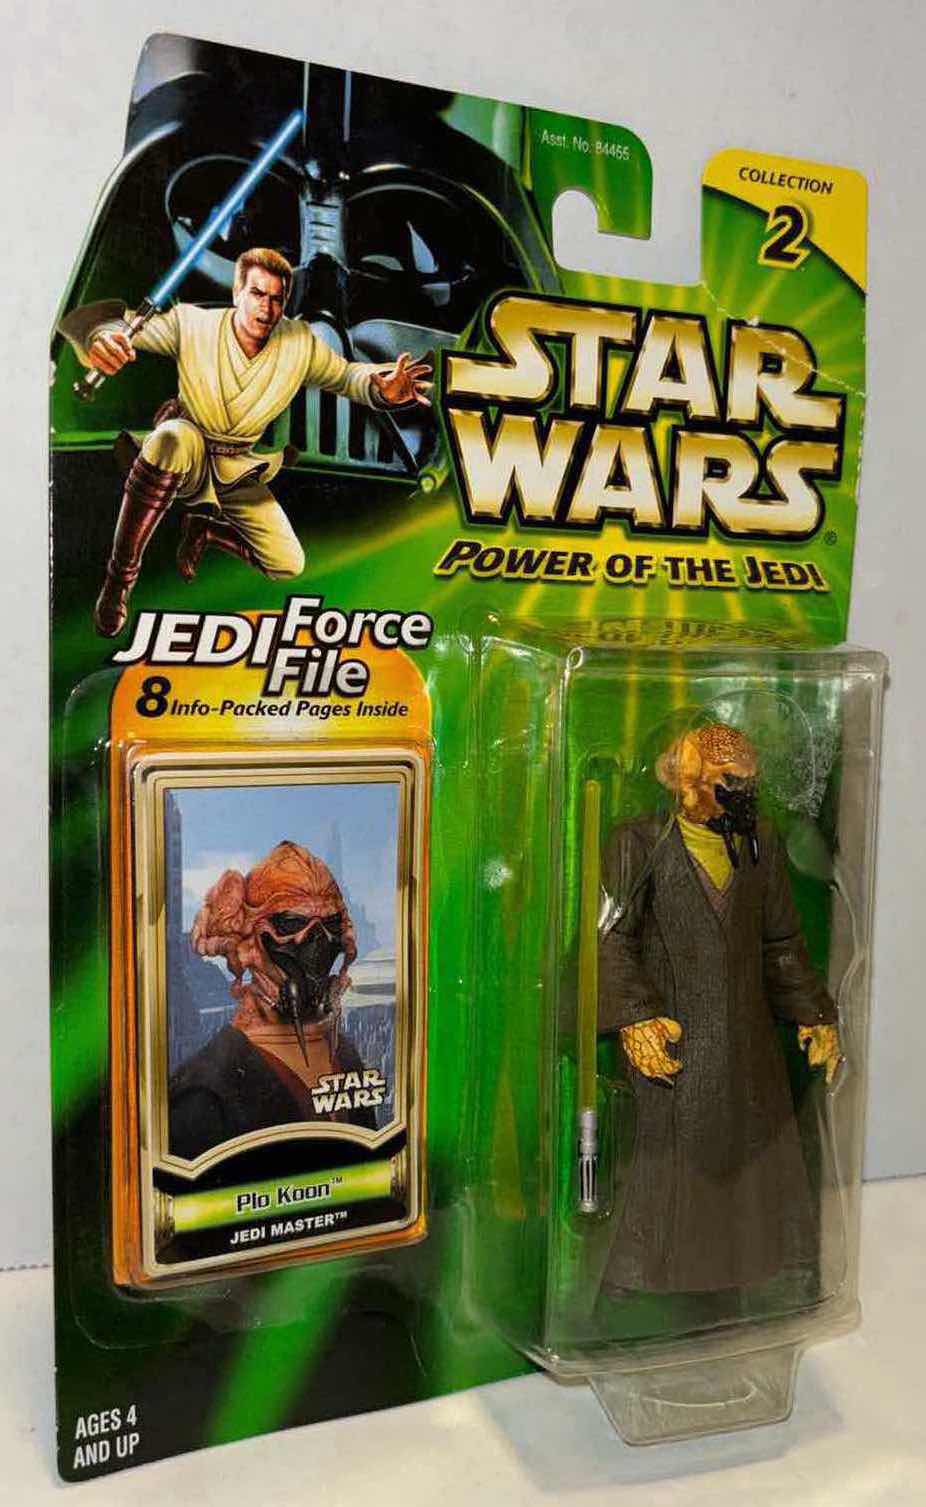 Photo 1 of NEW HASBRO STAR WARS POWER OF THE JEDI ACTION FIGURE, PLO KOON & JEDI FORCE FILE (1)